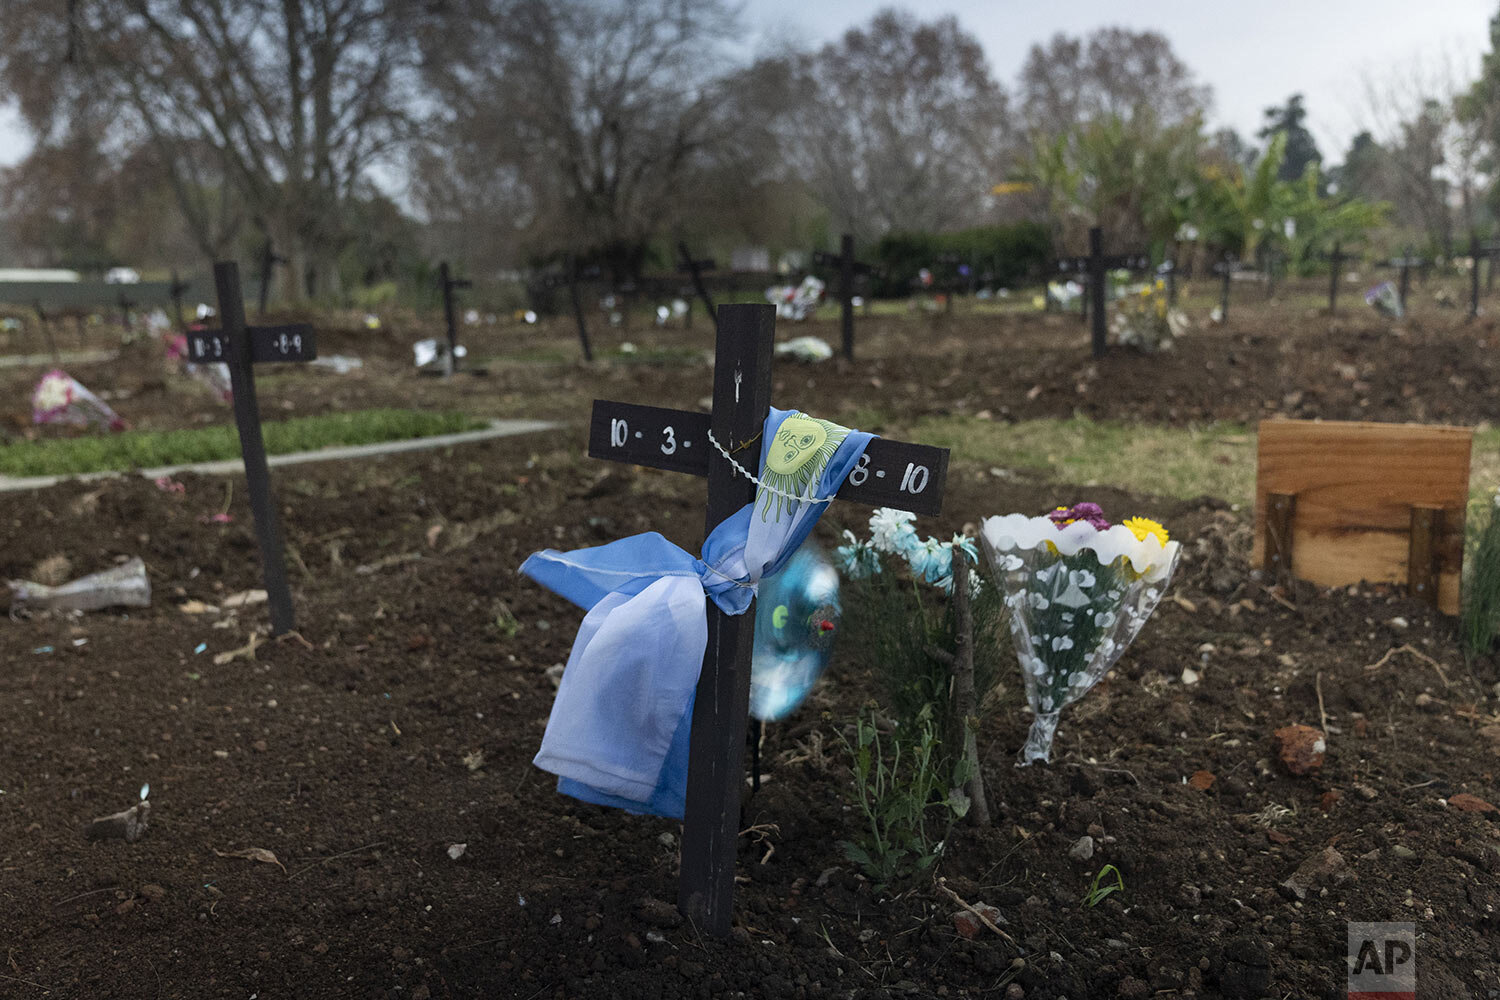  An Argentine flag wraps a cross at a gravesite in the COVID-19 section of the Chacarita cemetery in Buenos Aires, Argentina, Tuesday, July 13, 2021. Argentina is close to reaching 100,000 virus-related deaths. (AP Photo/Victor R. Caivano) 